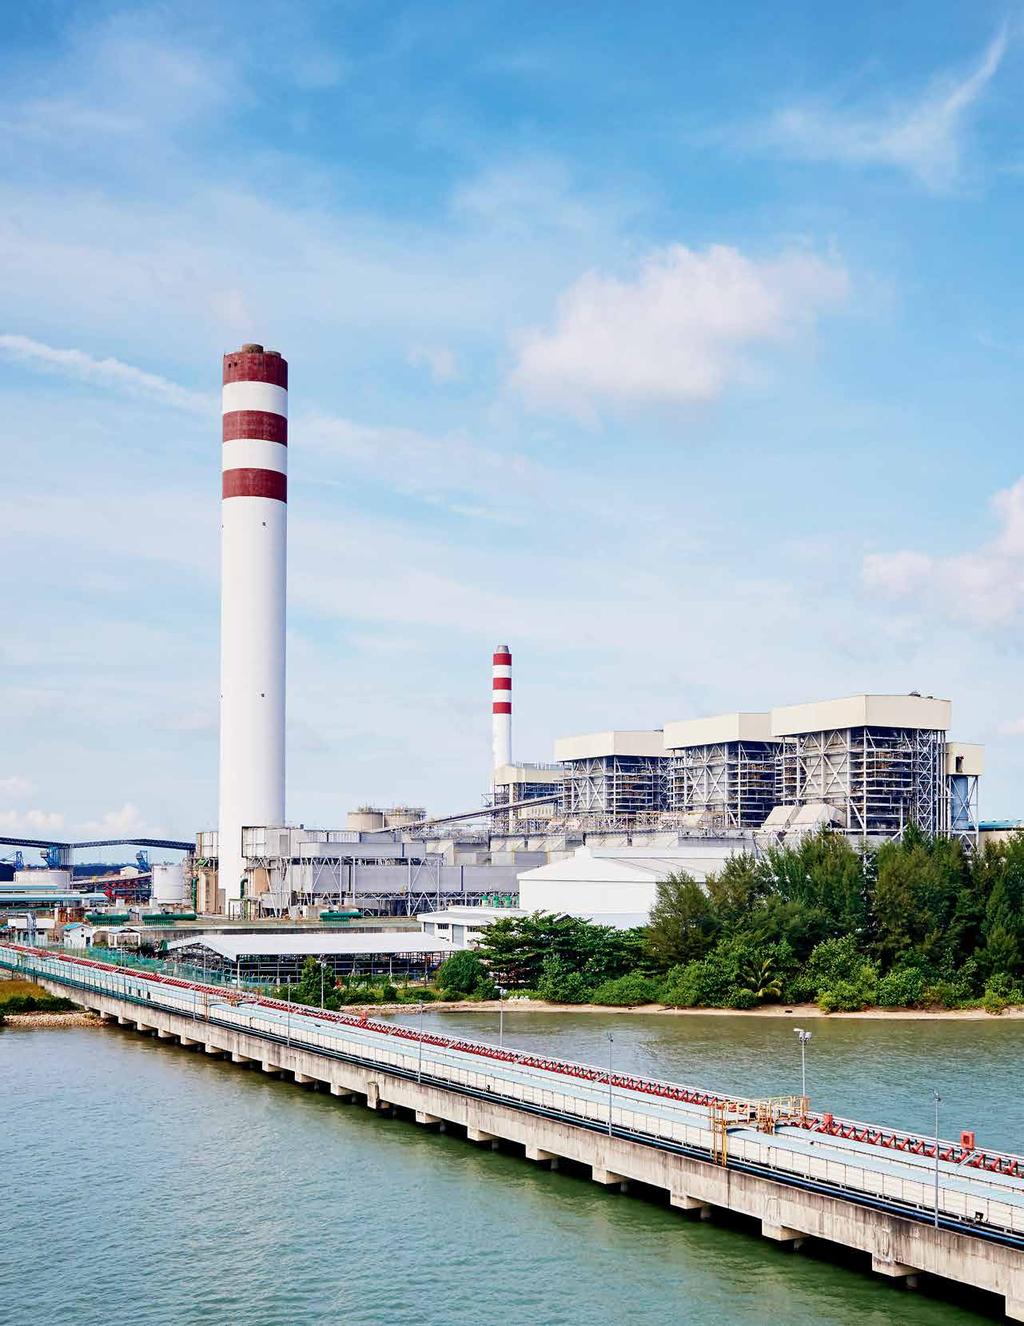 40 Malakoff Corporation Berhad Annual Report 2016 Dear Shareholders, COMMITTED TO BUILDING TOMORROW S ENERGY SYSTEMS, TODAY Building on its position as the pre-eminent Independent Power Producer (